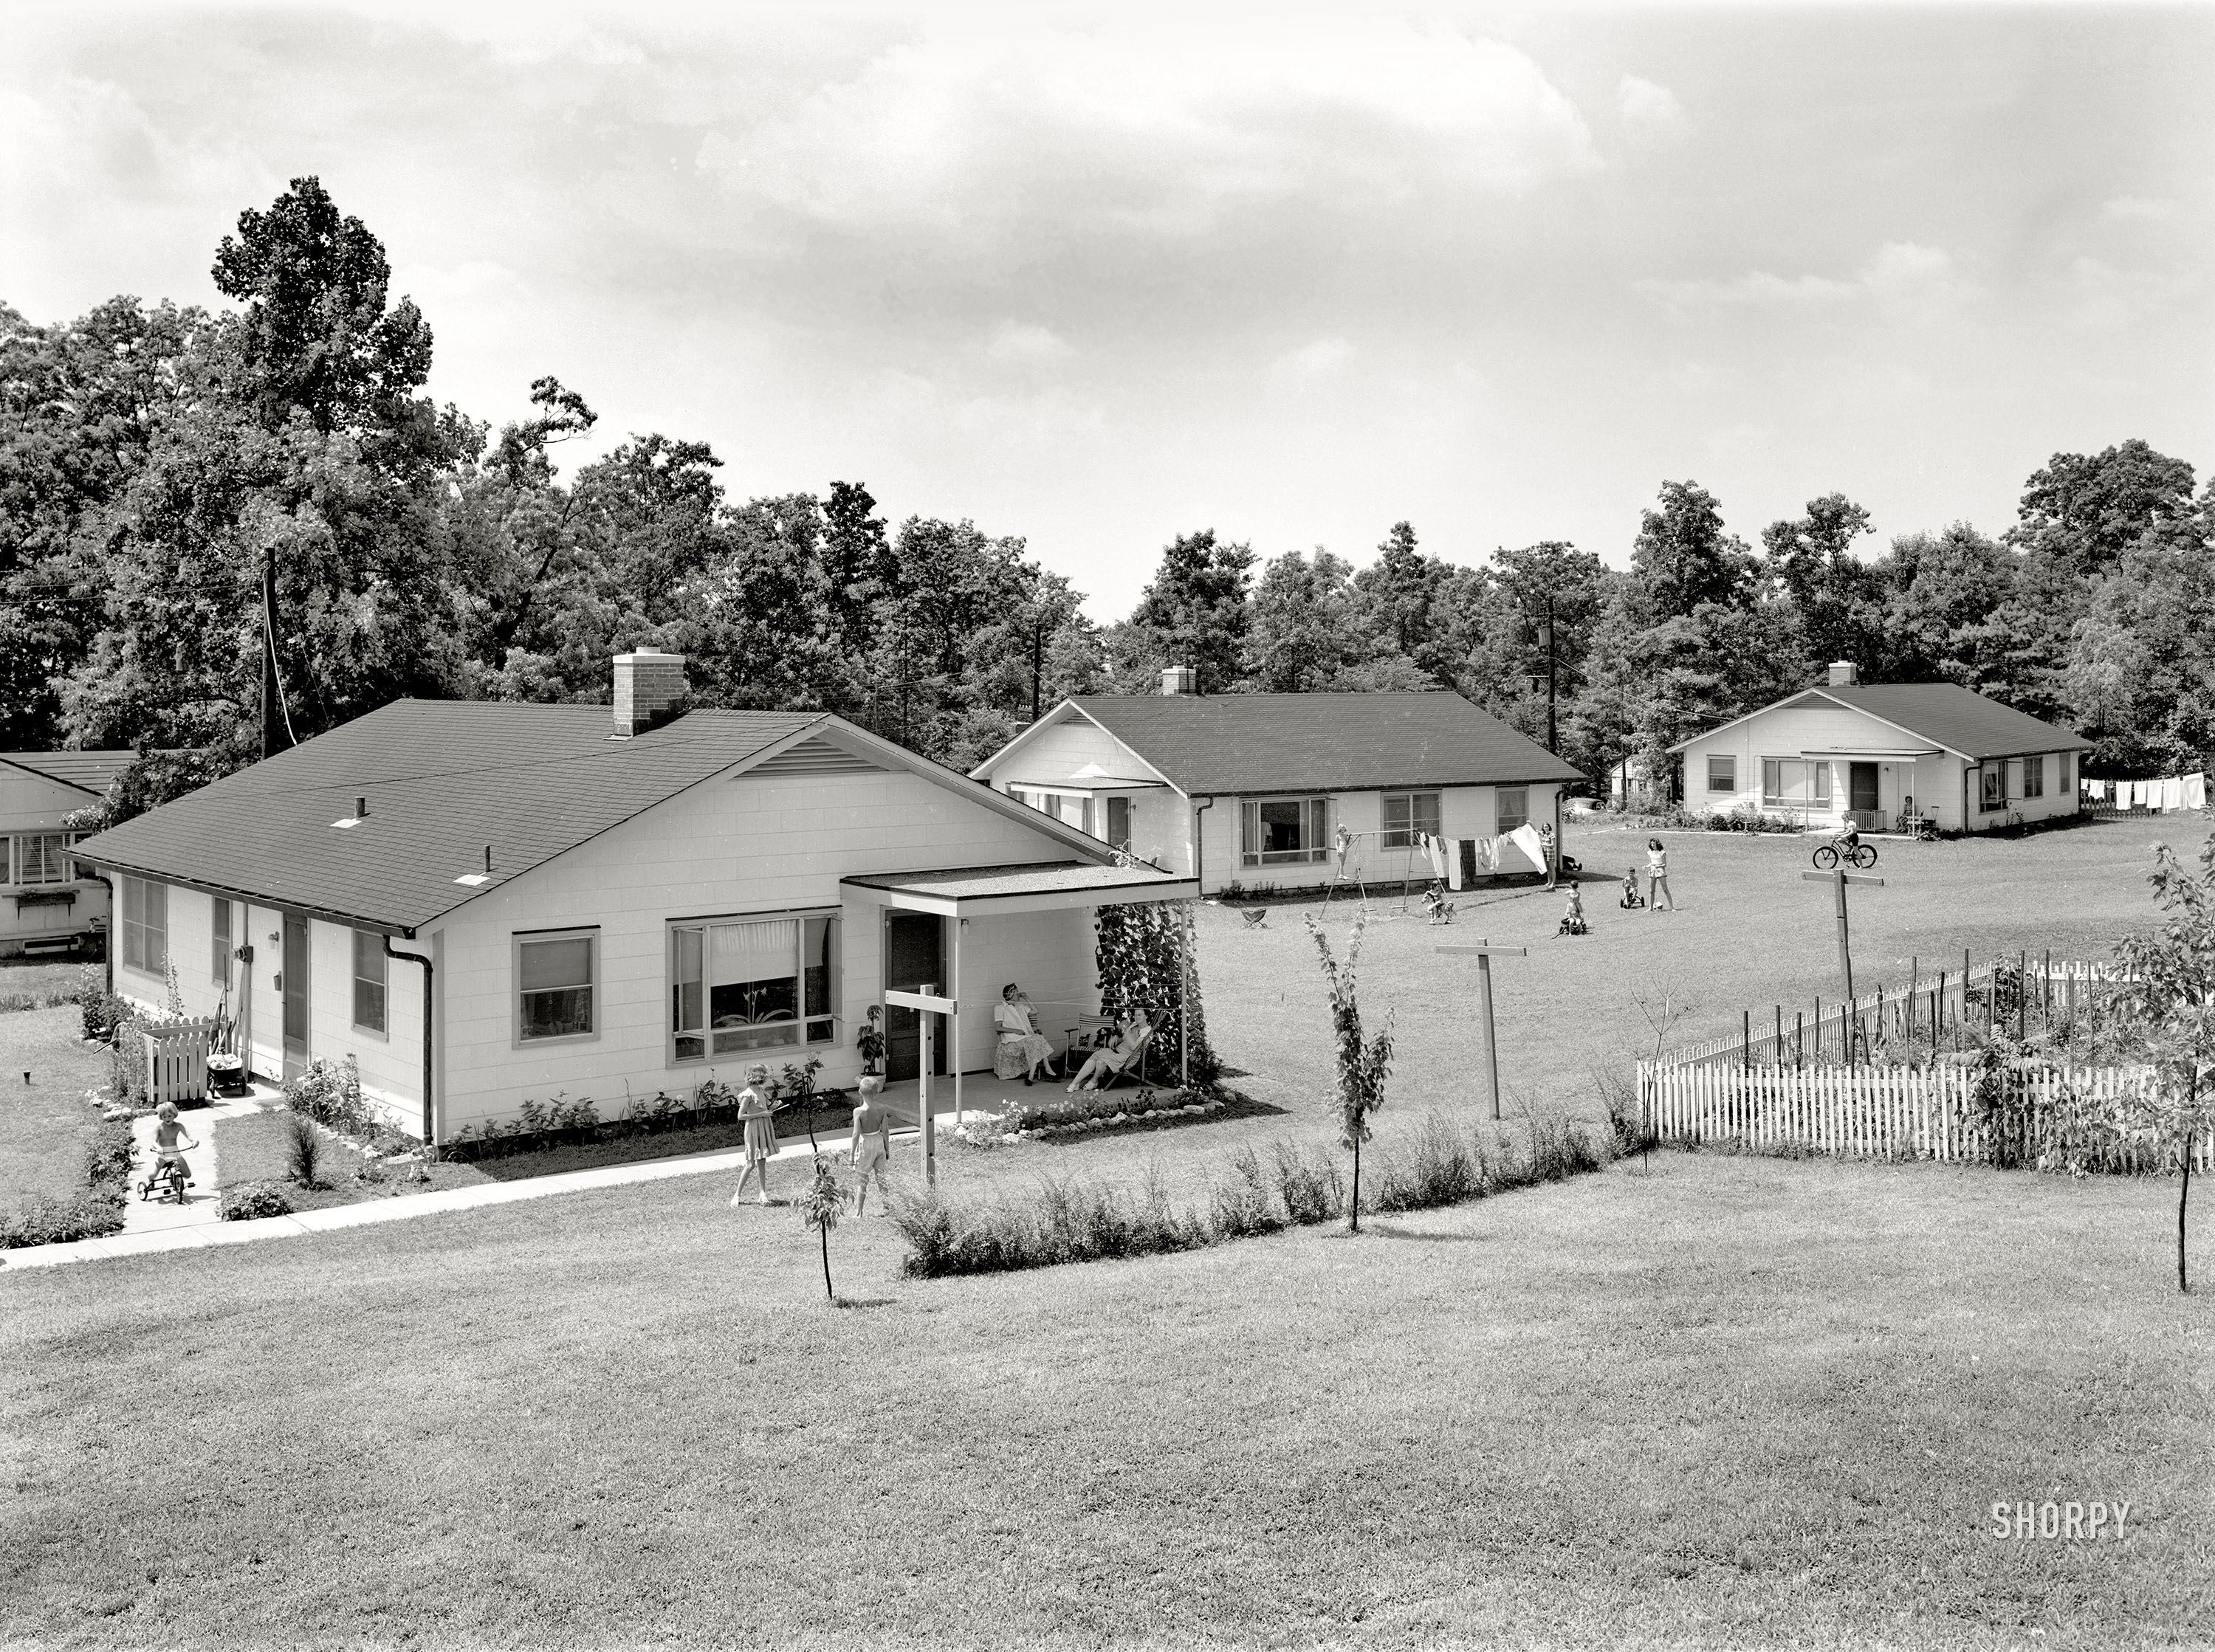 August 3, 1951. Oak Ridge, Tennessee. "Three Type 34 Houses -- 601 Michigan, 102 & 102½ Meadow Road." Photo by Jack Tarver for the Atomic Energy Commission. View full size.